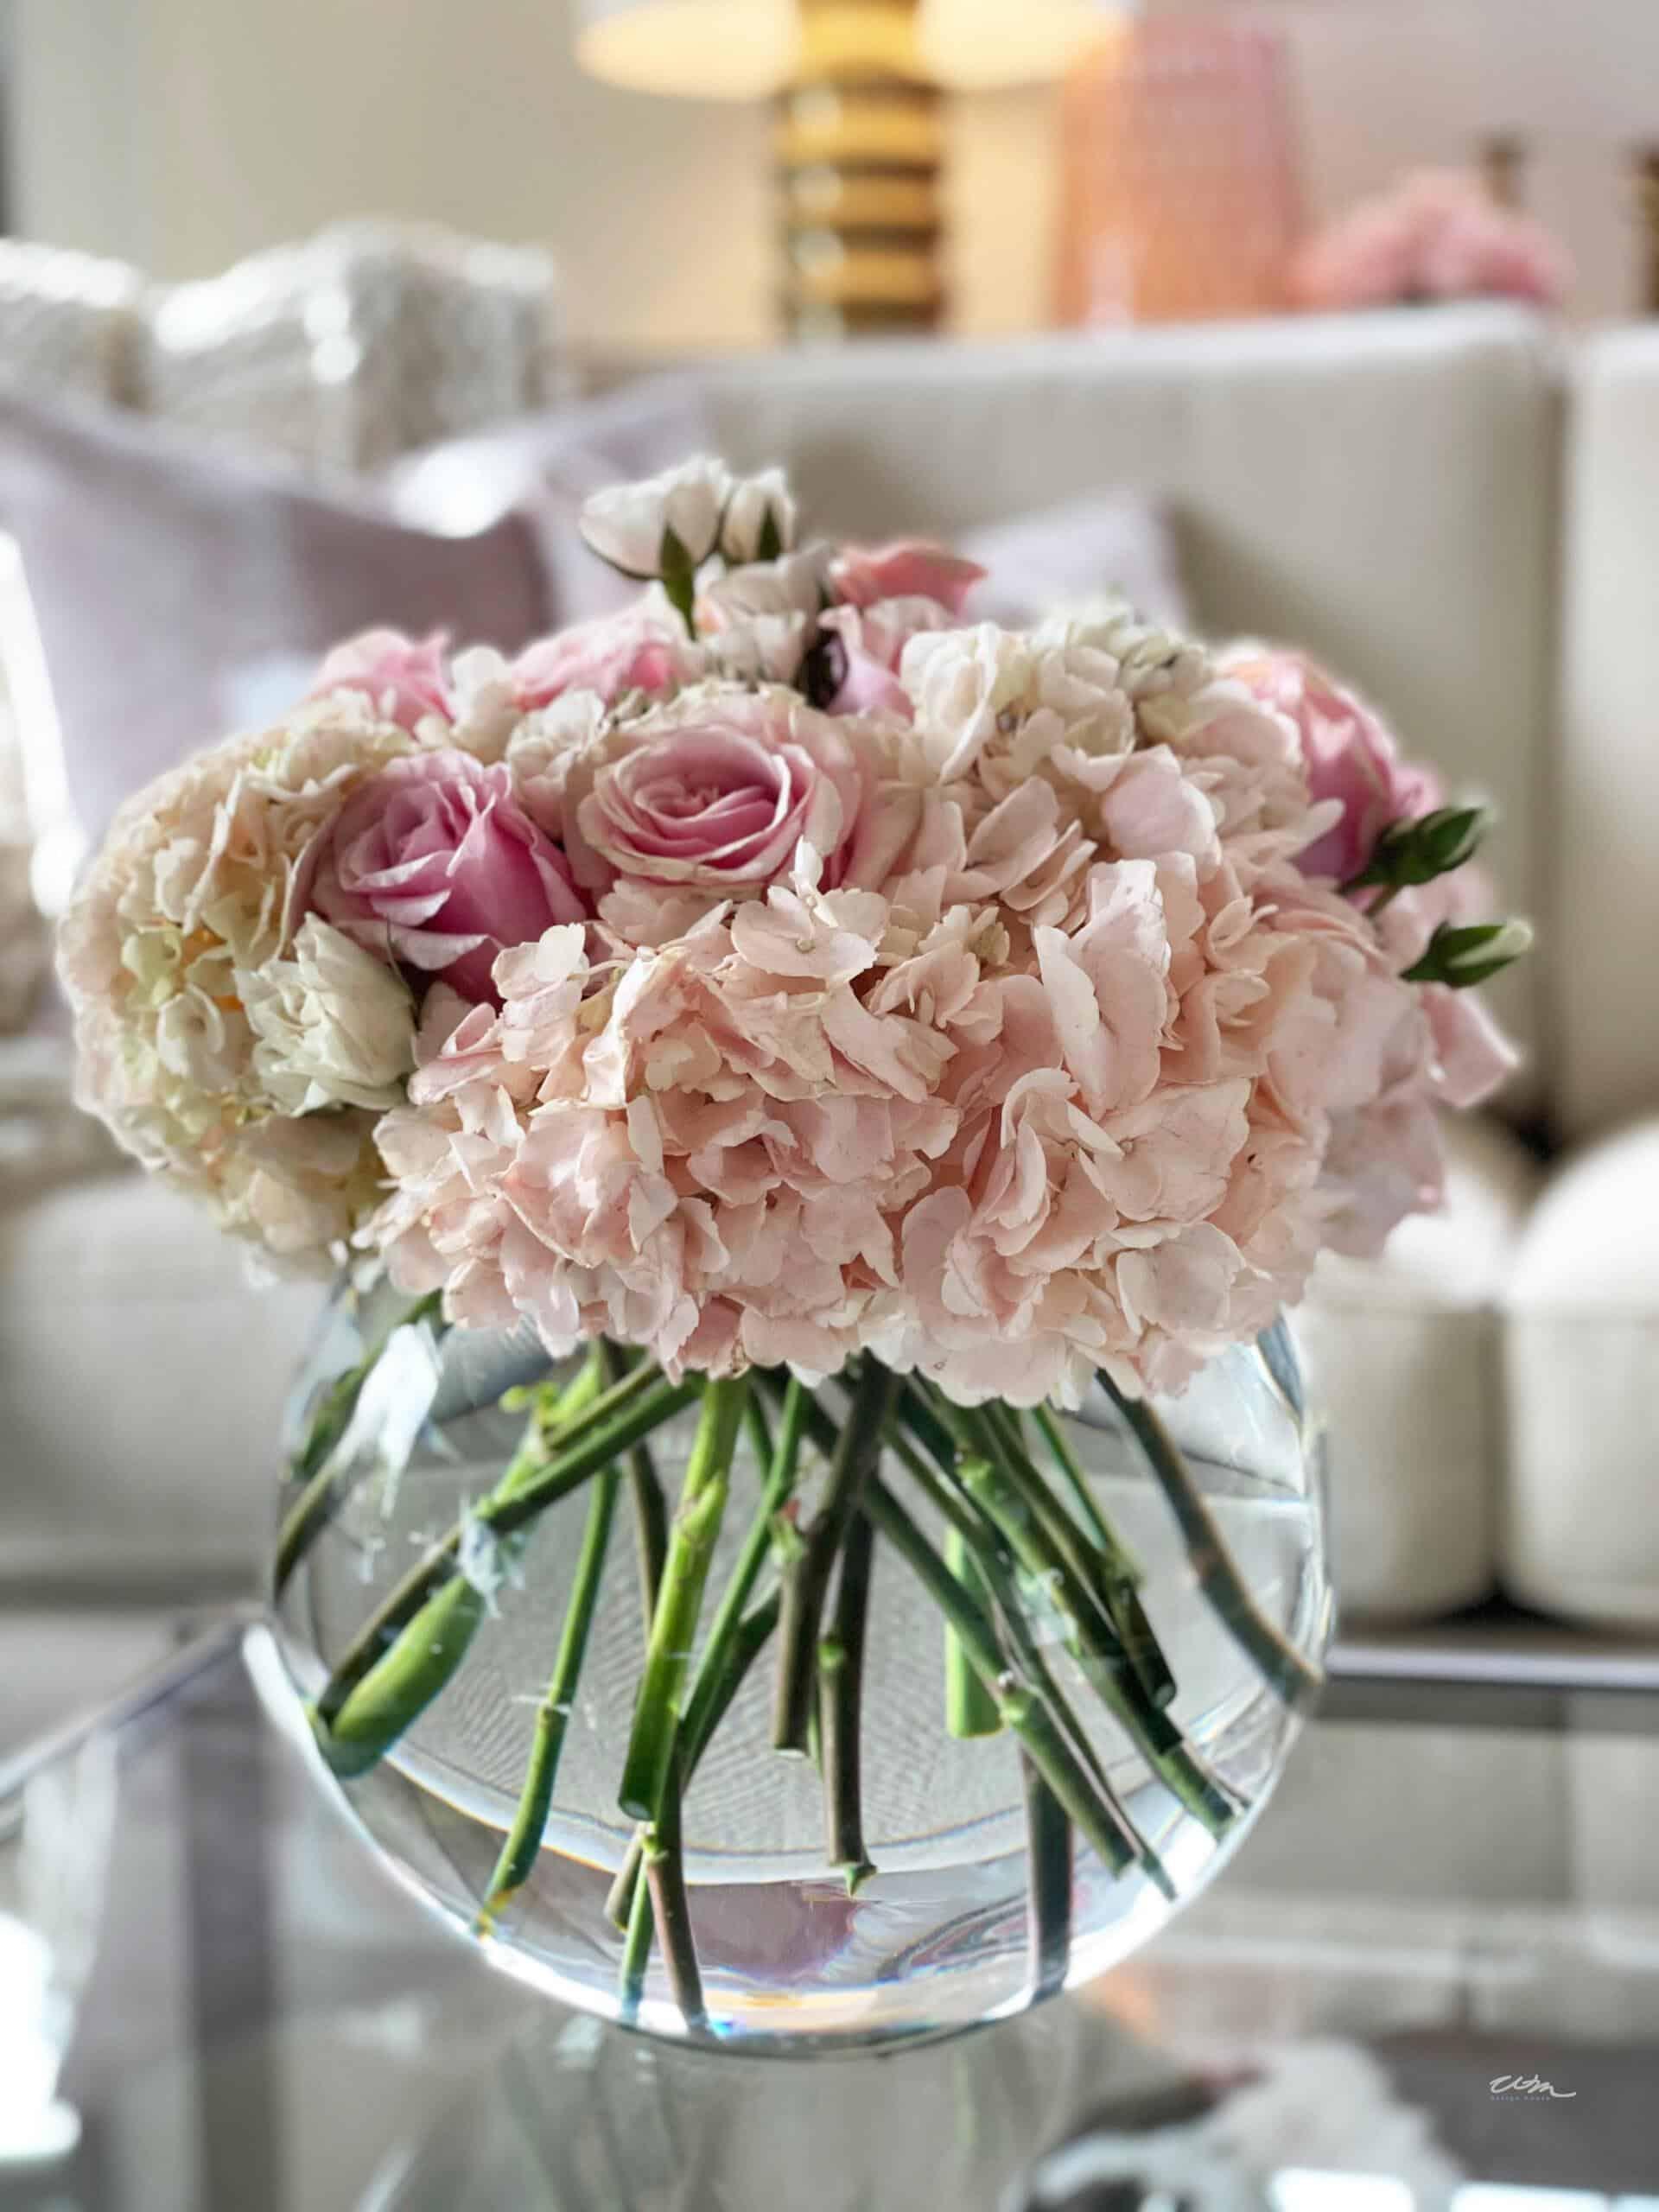 basic floral arrangement in a short, round glass vase filled with pink hydrangeas and pink roses.